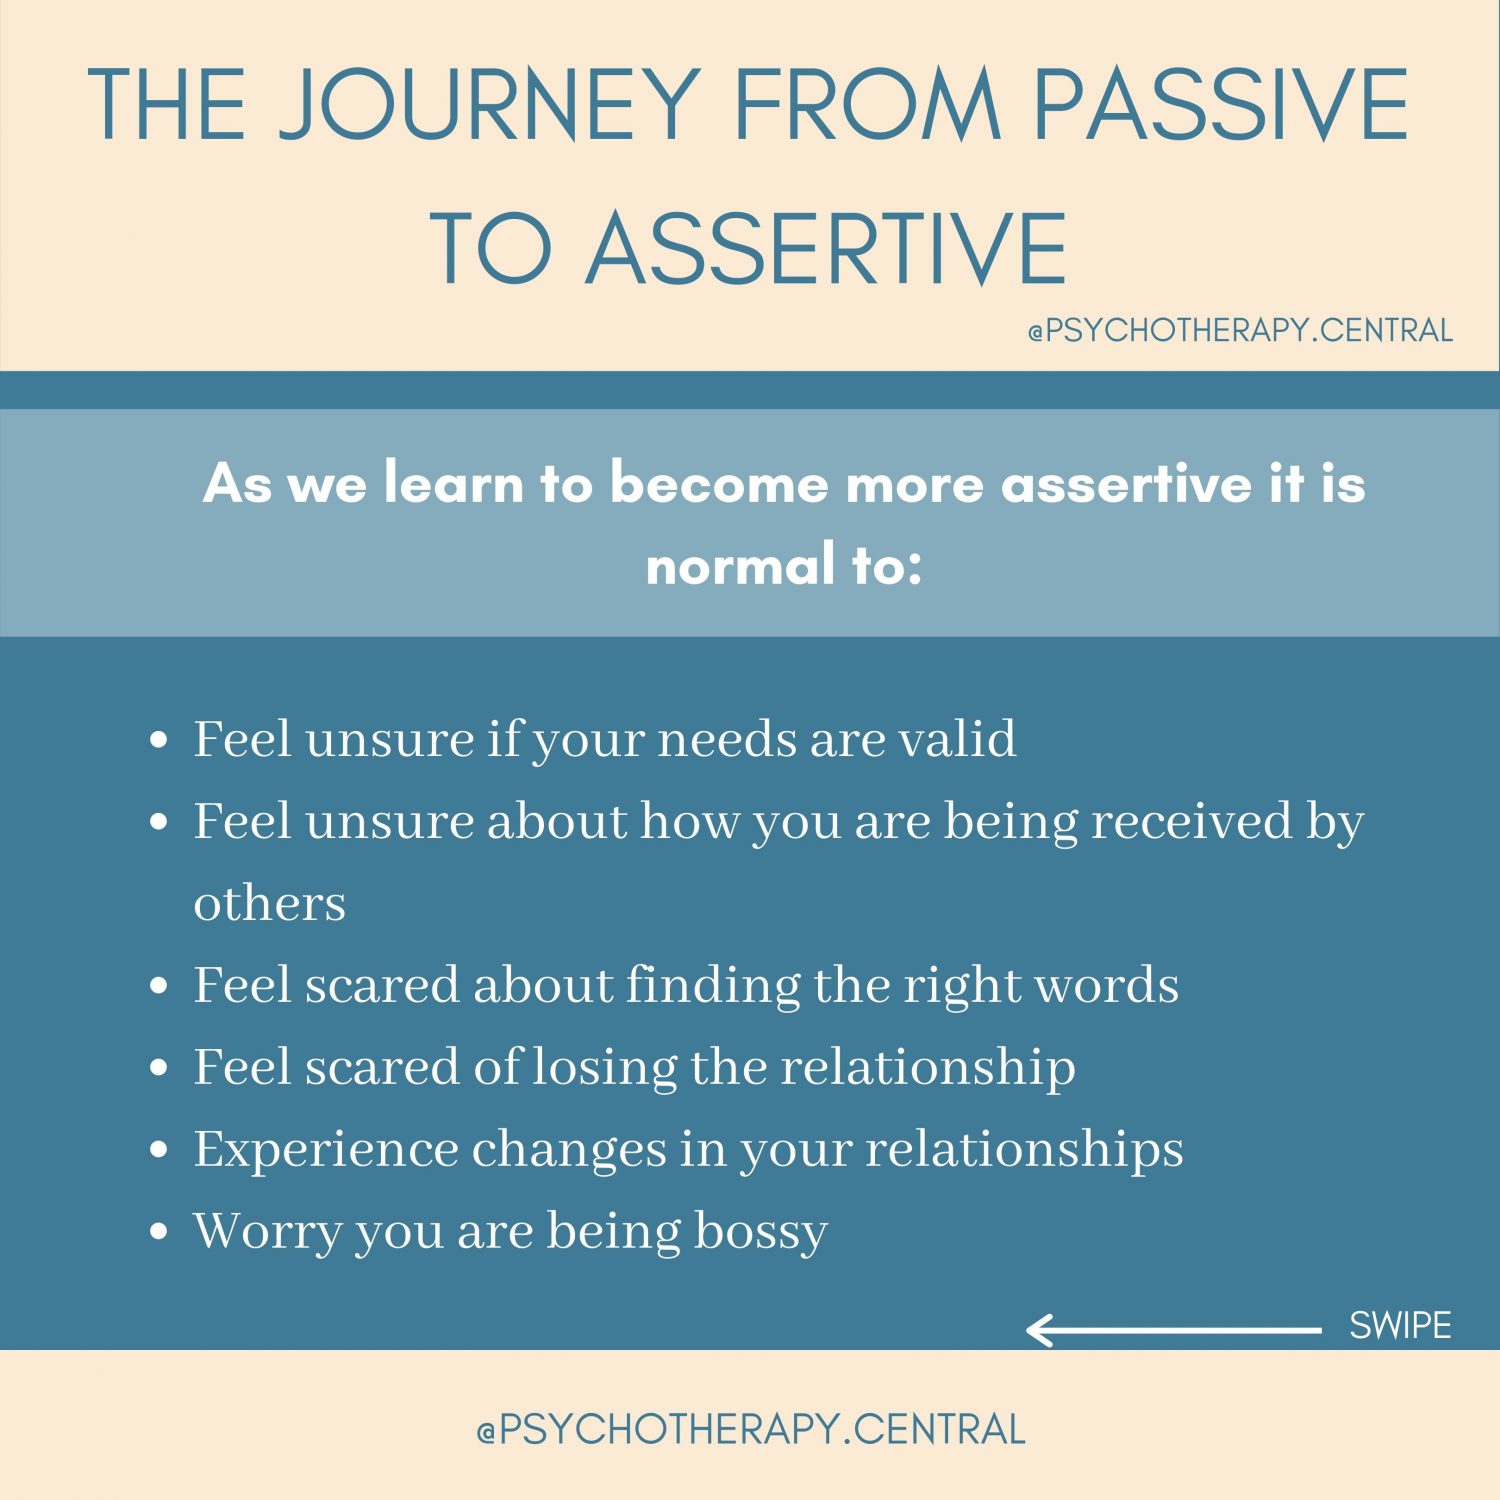 The Journey from passive to assertive